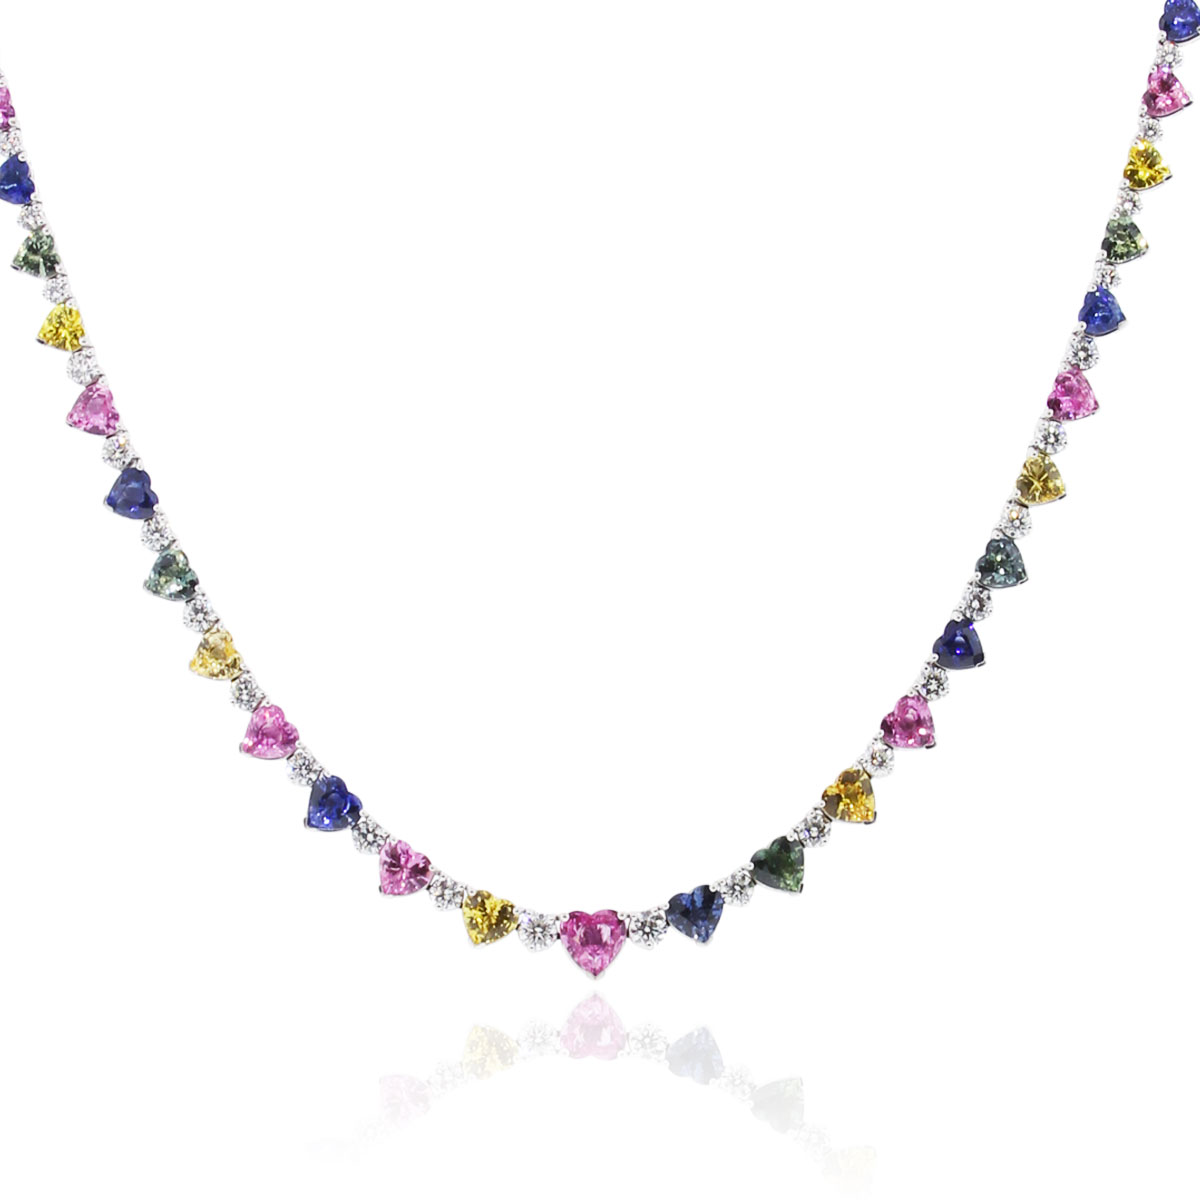 colorful gemstone jewelry necklace